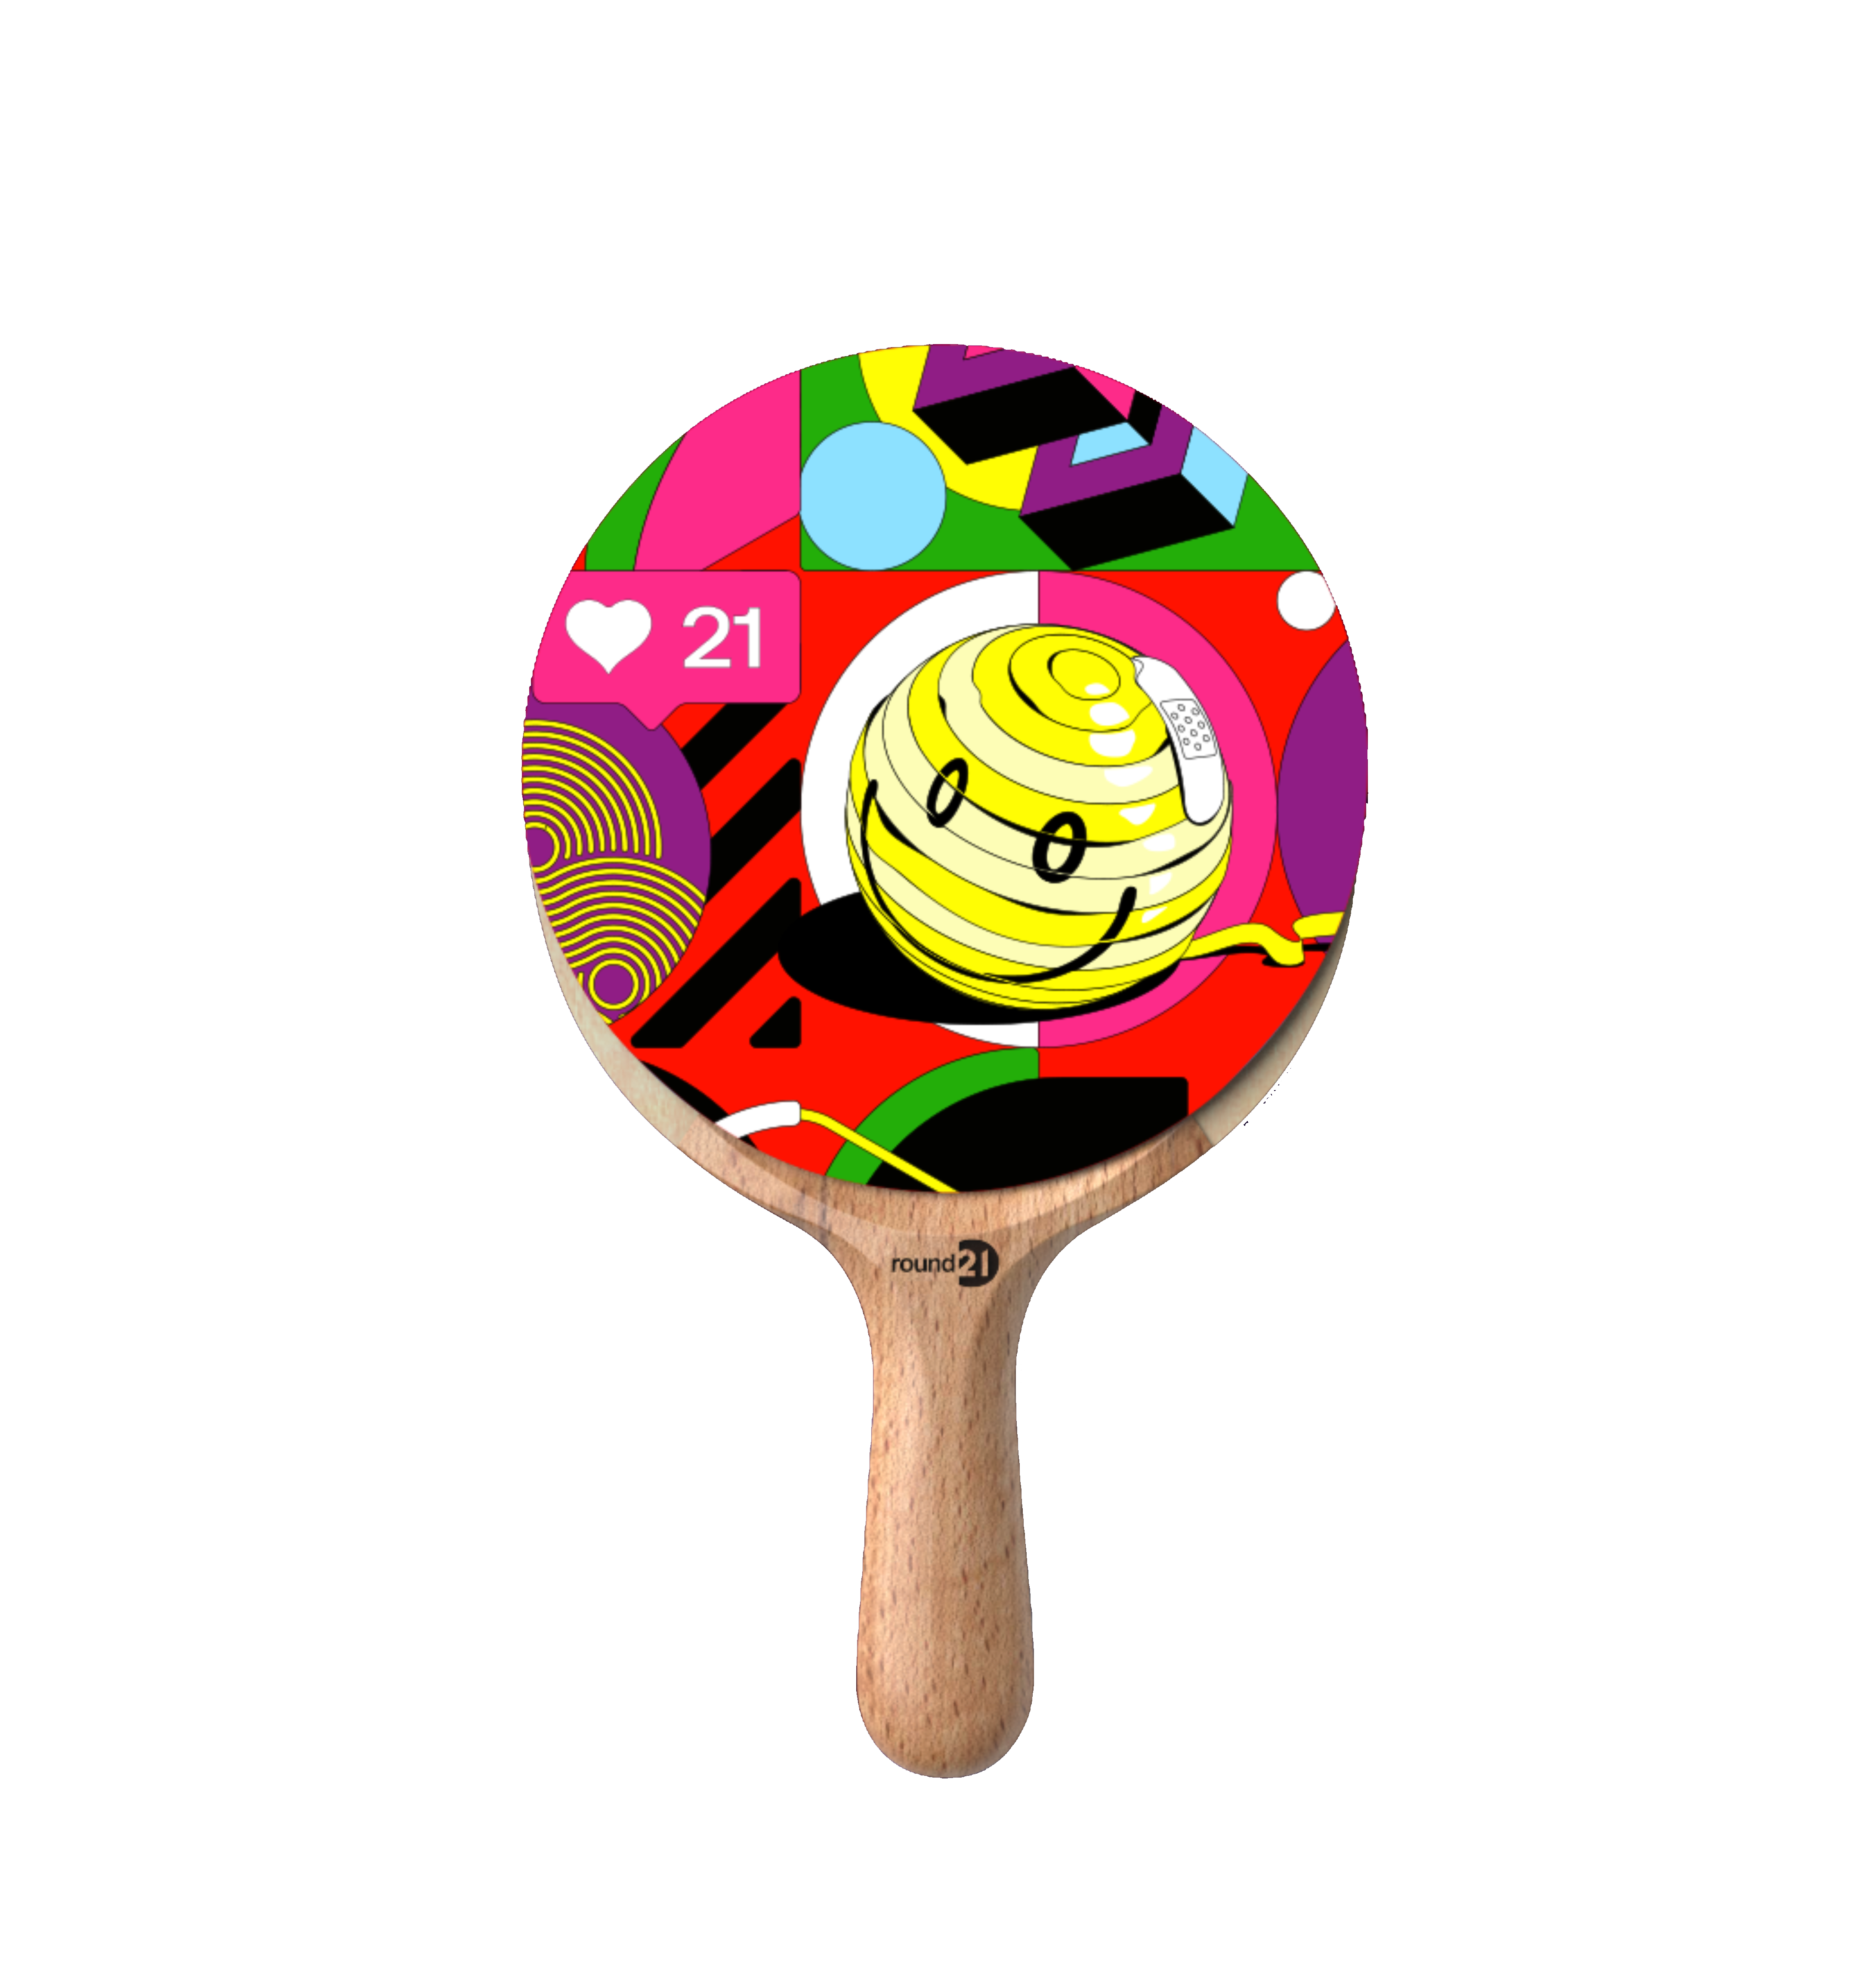 Ping Pong Paddles That Perform and Delight